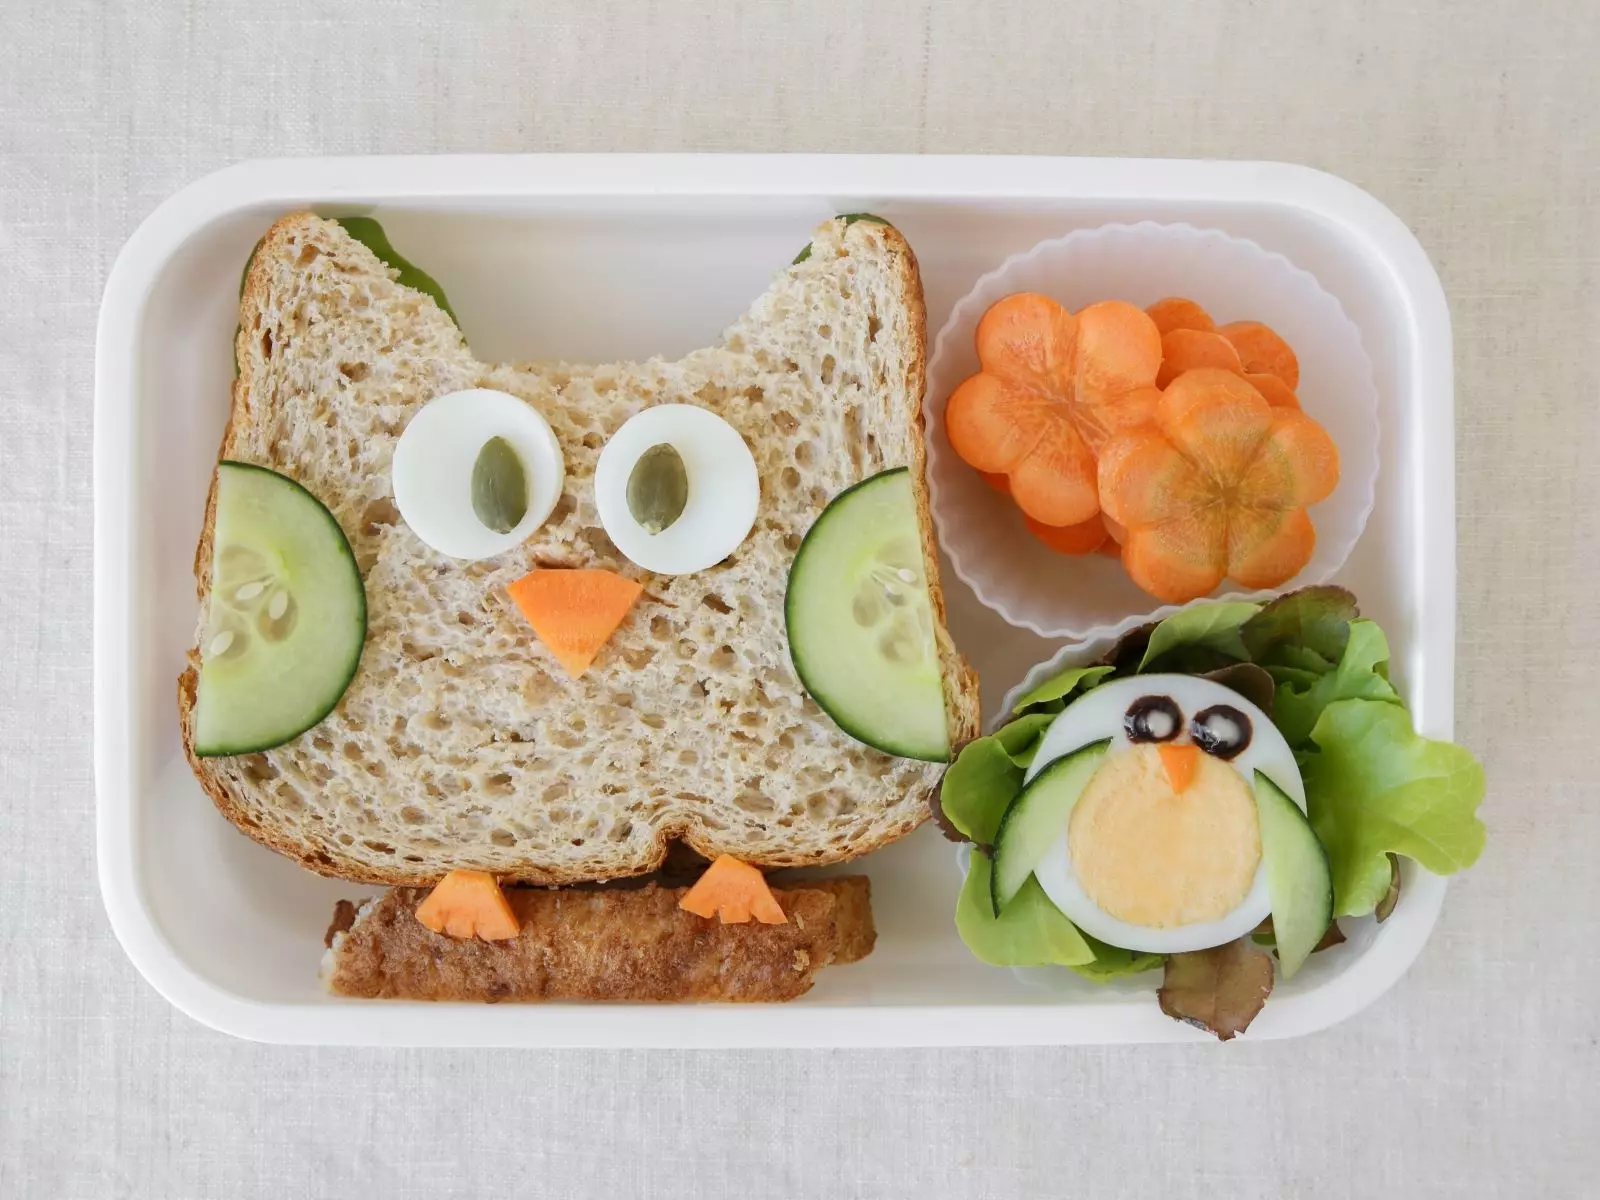 Back-to-school lunchbox inspiration: 5 easy ways to pack a fun